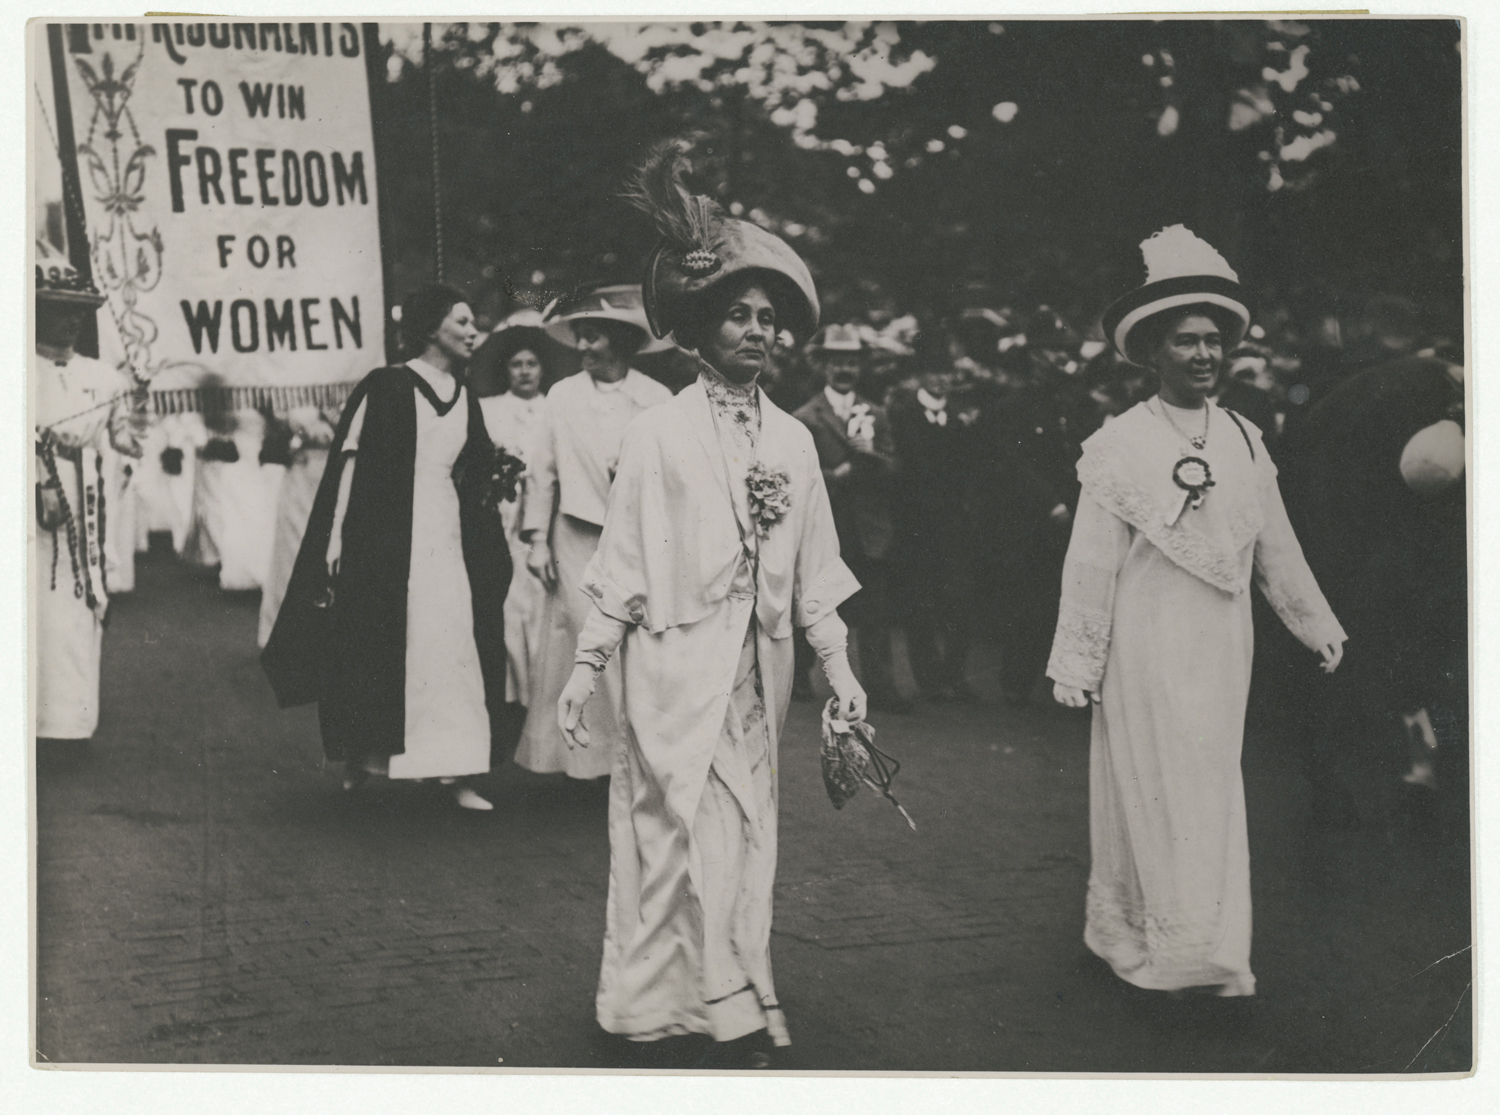 British Suffragettes walking down the street carrying signs.